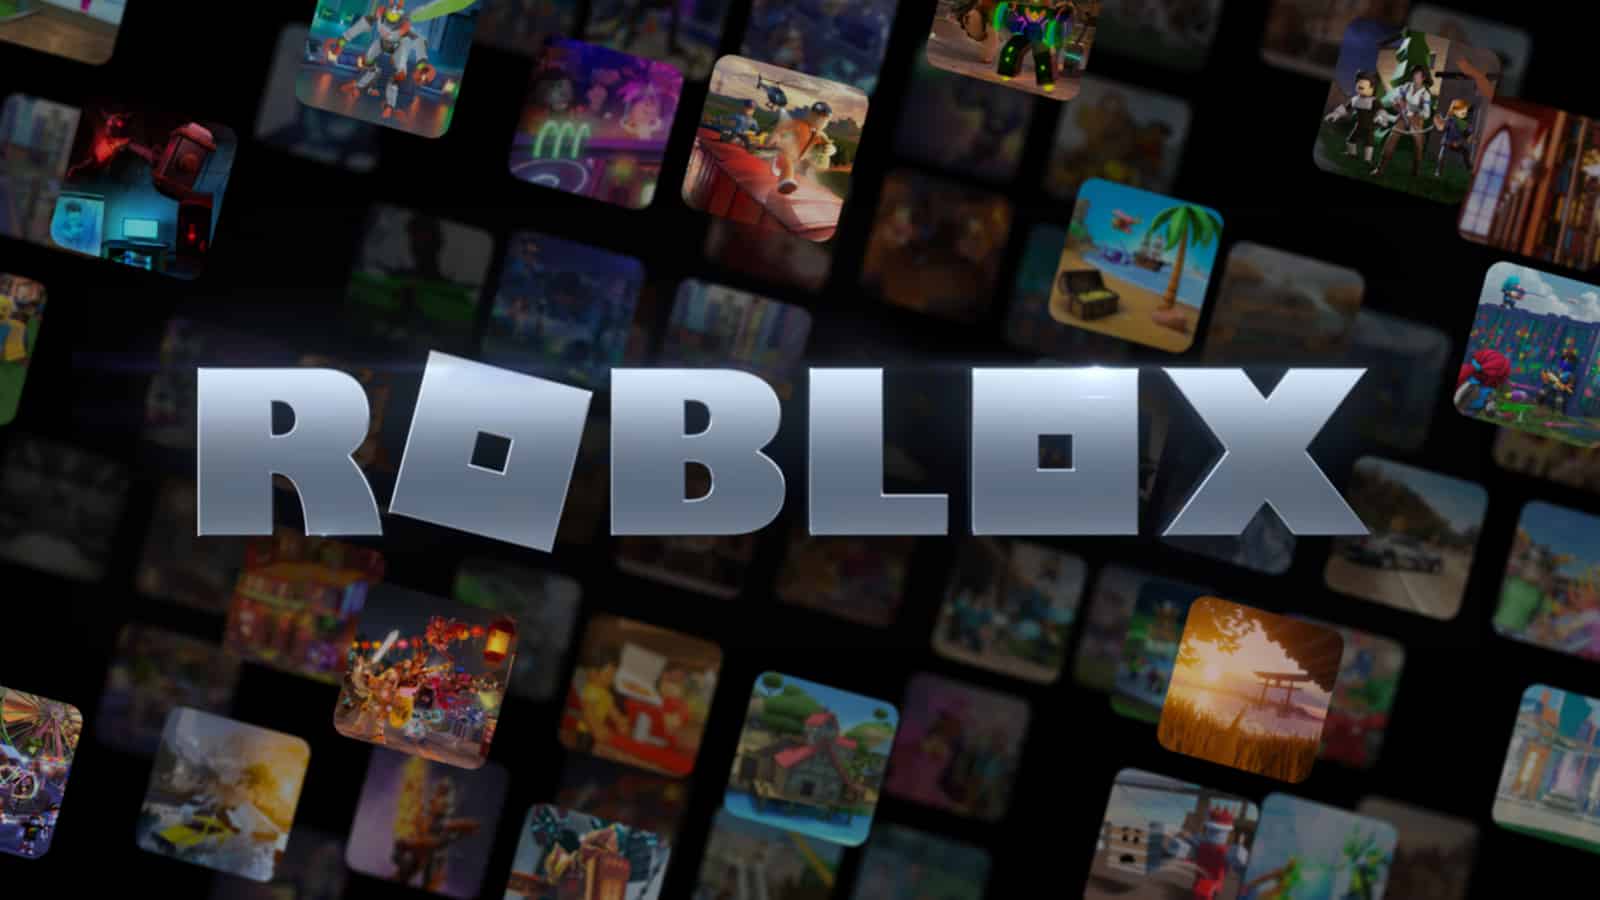 New* Cute Face ID Codes & Links [] Brookhaven, Bloxburg, Berry Avenue &  other games [] ROBLOX 